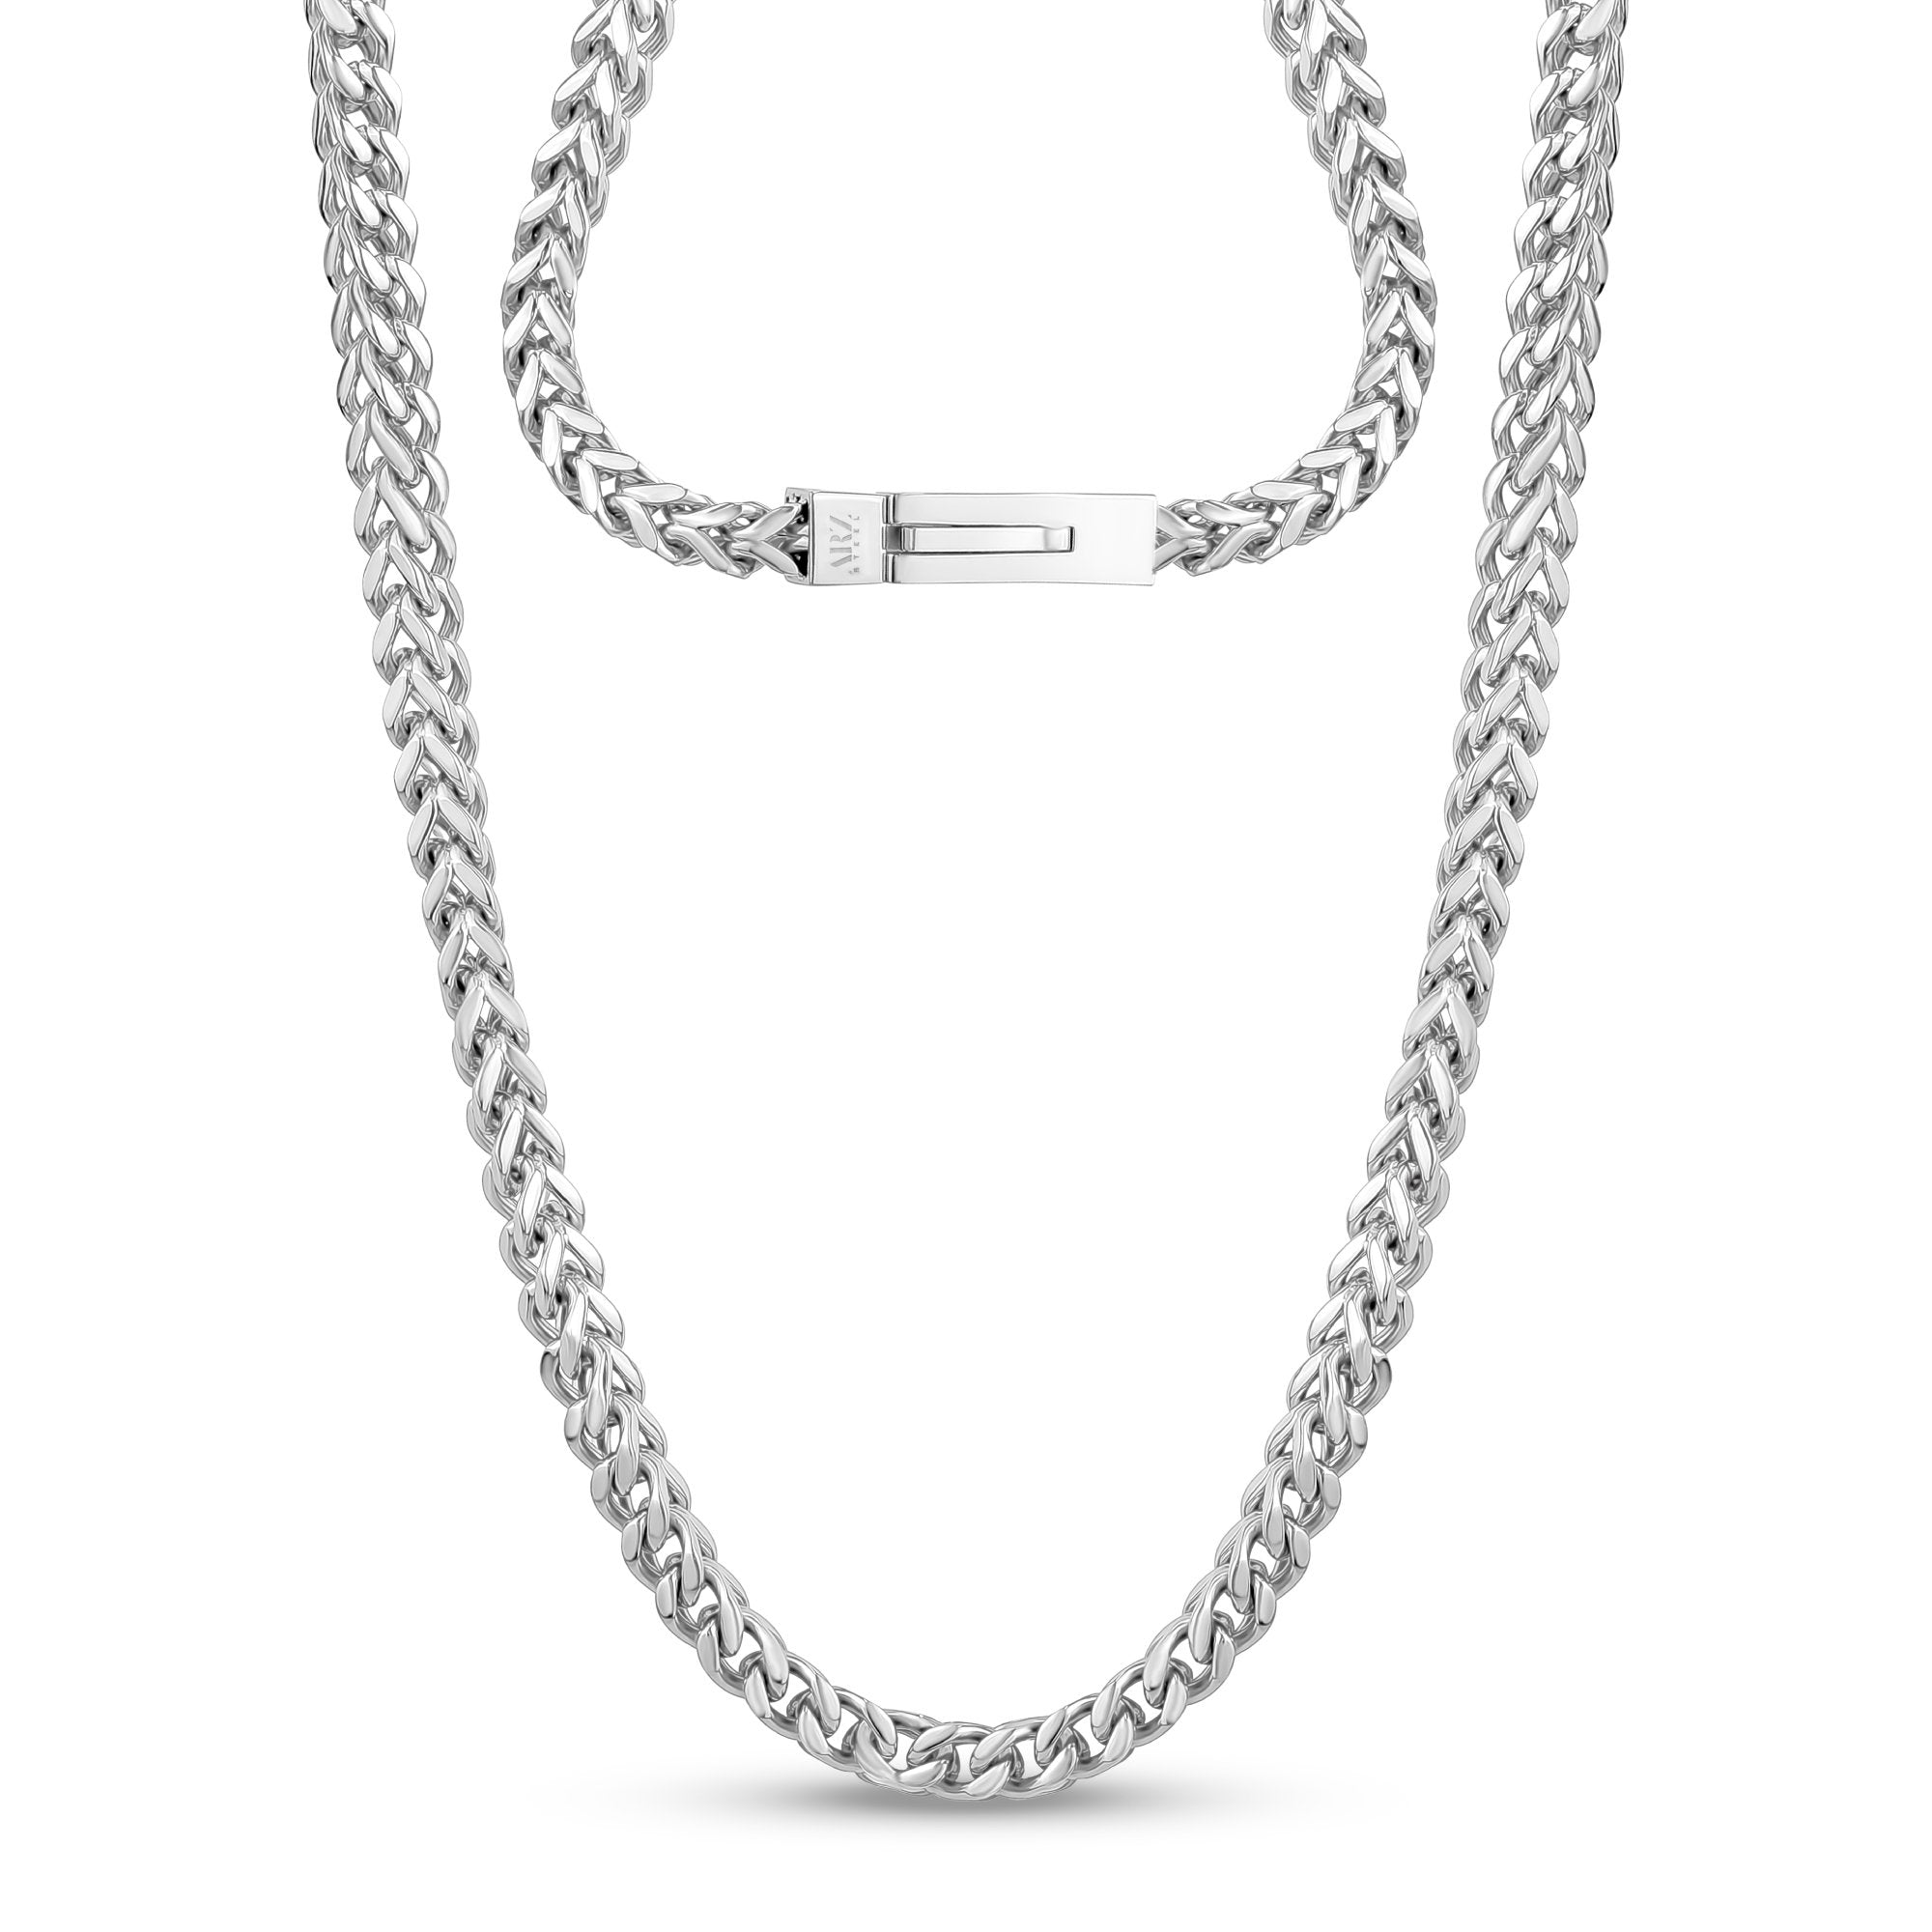 6mm Franco Chain Necklace Made Of Silver & Stainless Steel